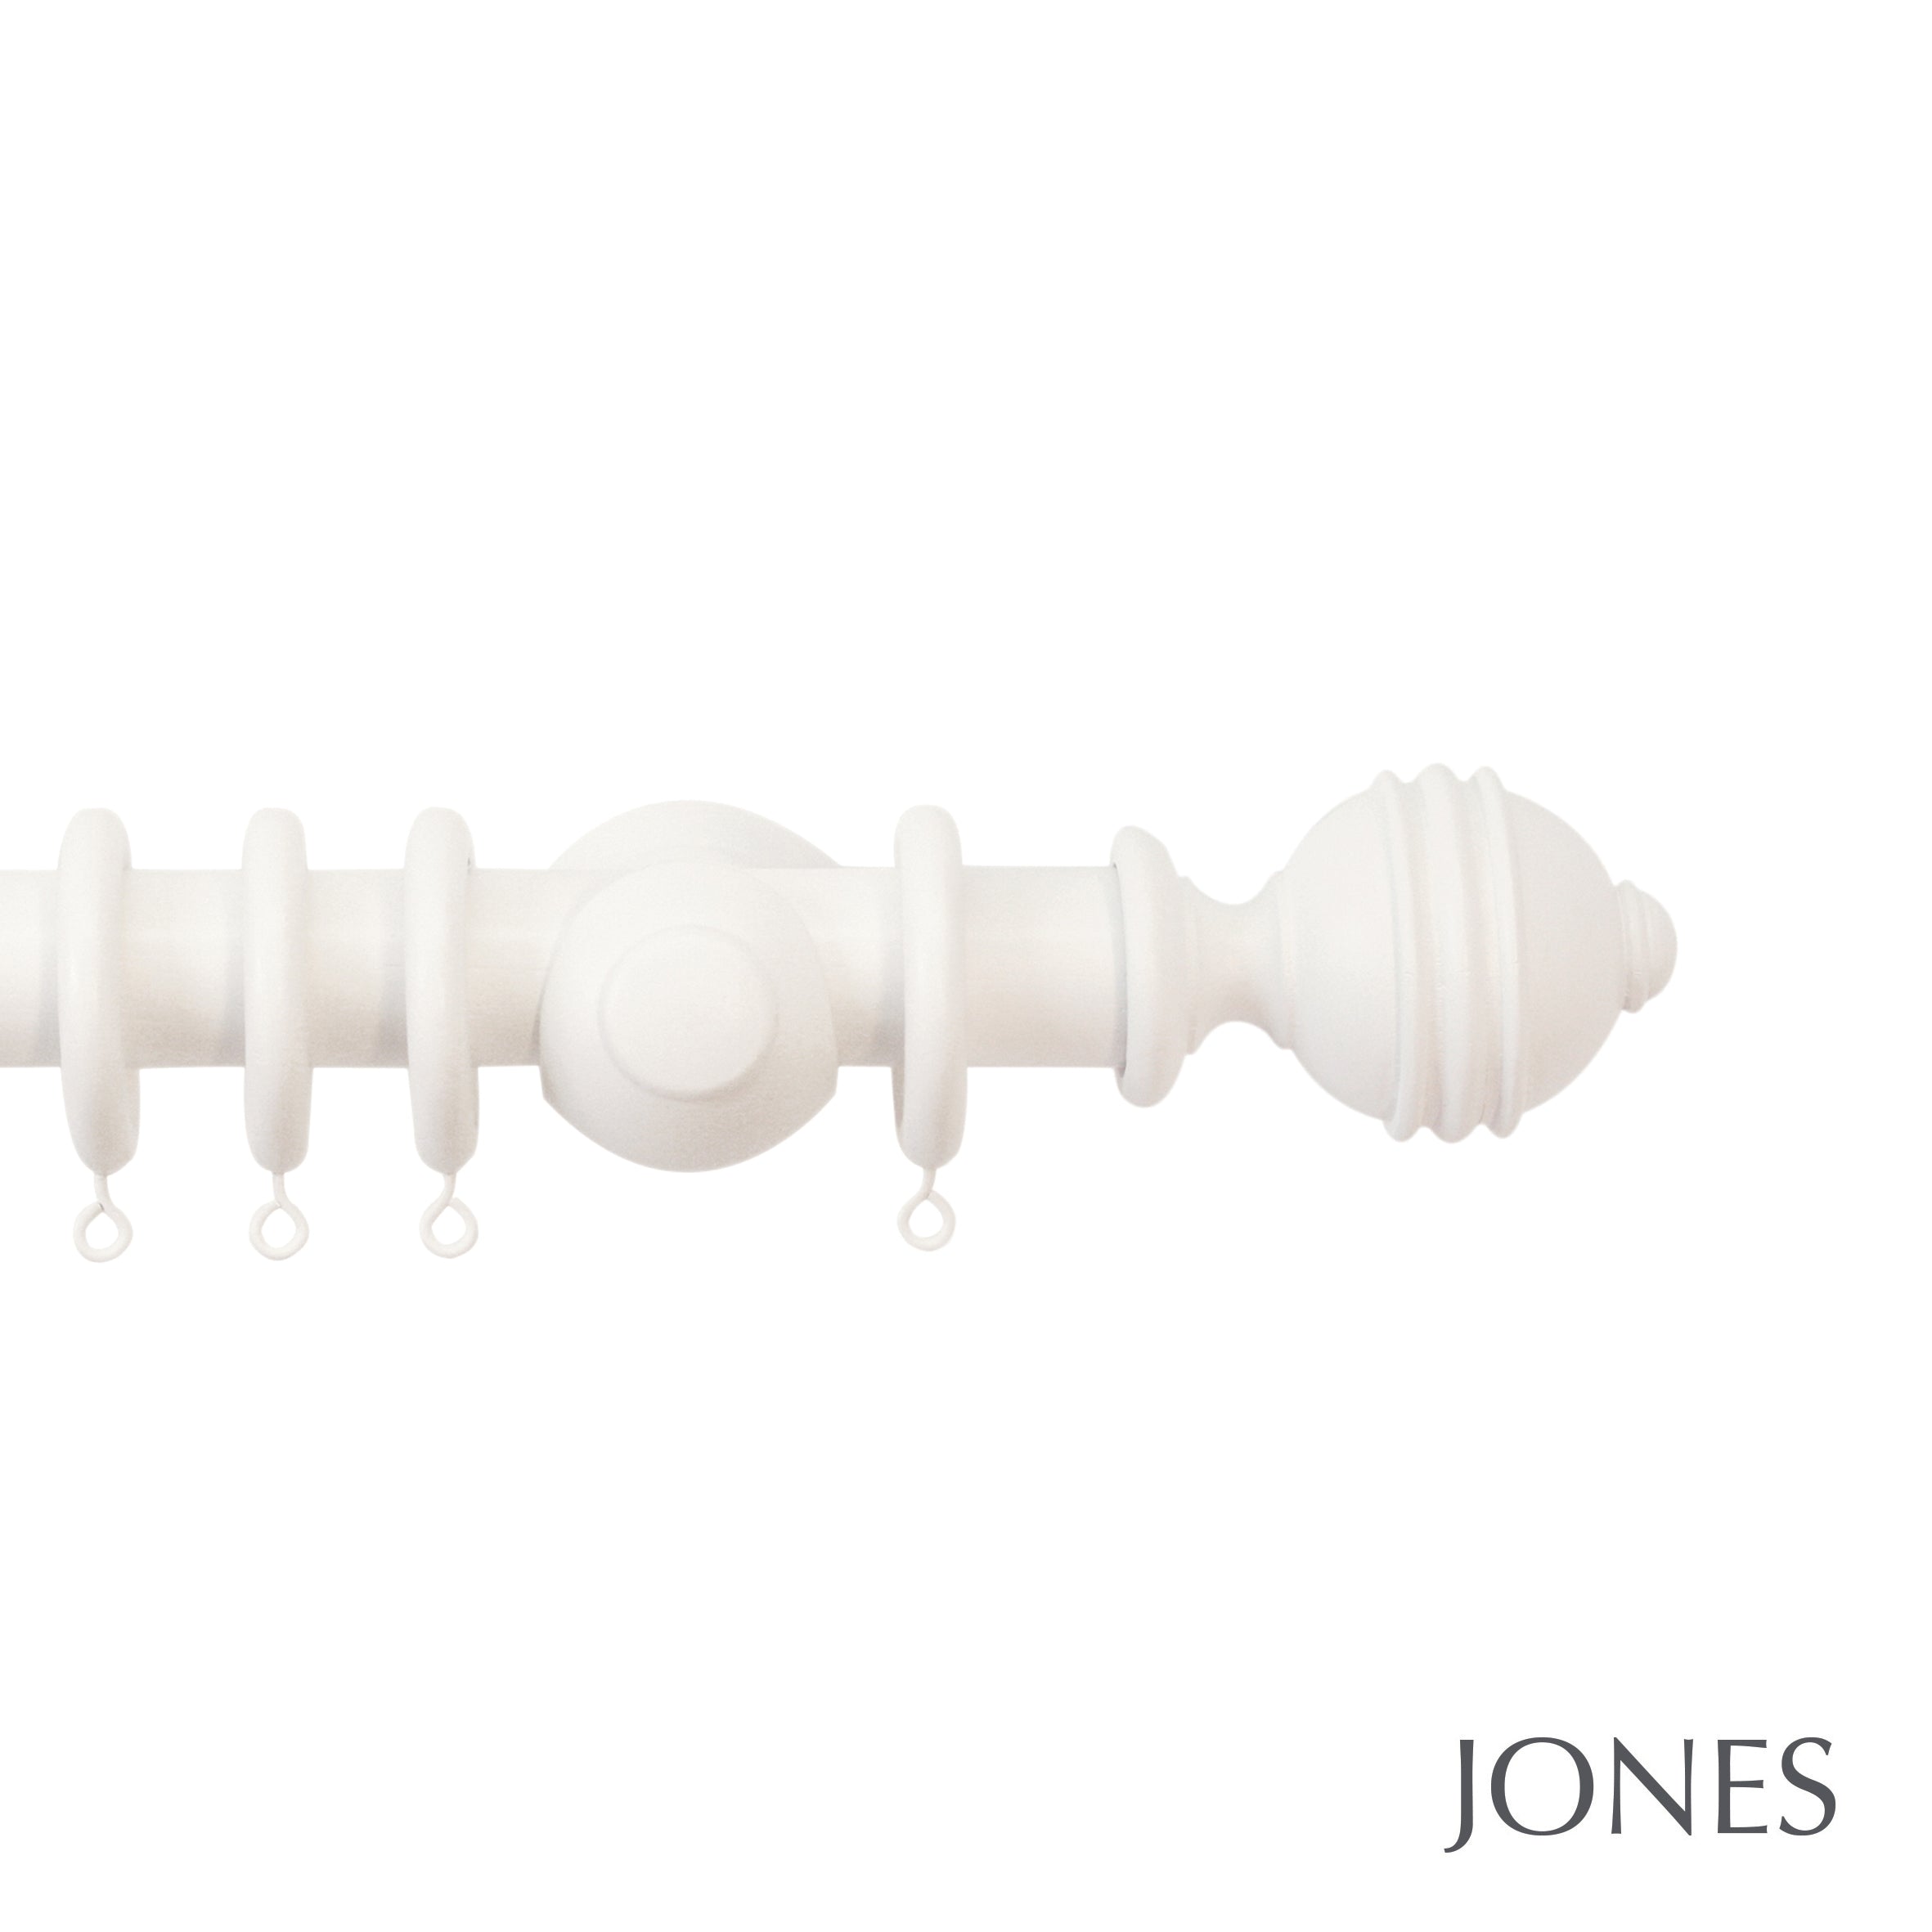 Jones Interiors Cathedral Ely Finial Curtain Pole Set in Cotton